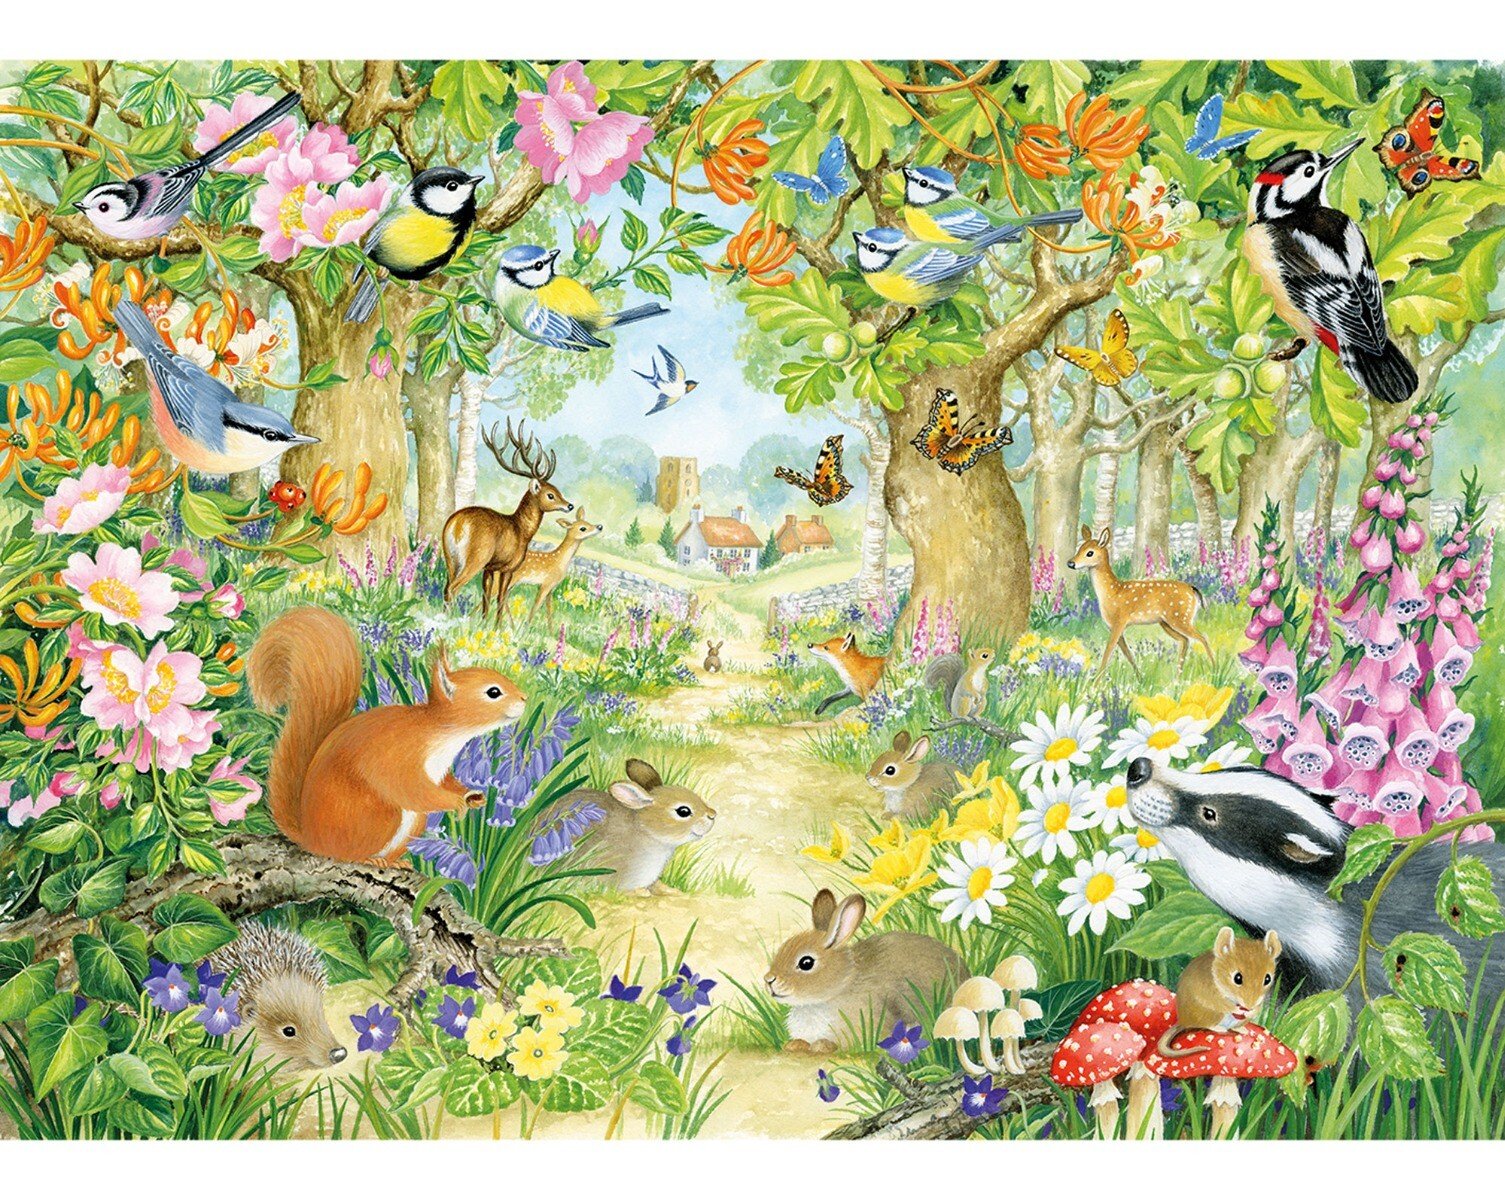 Woodland Forest Shaped 300-Piece Puzzle